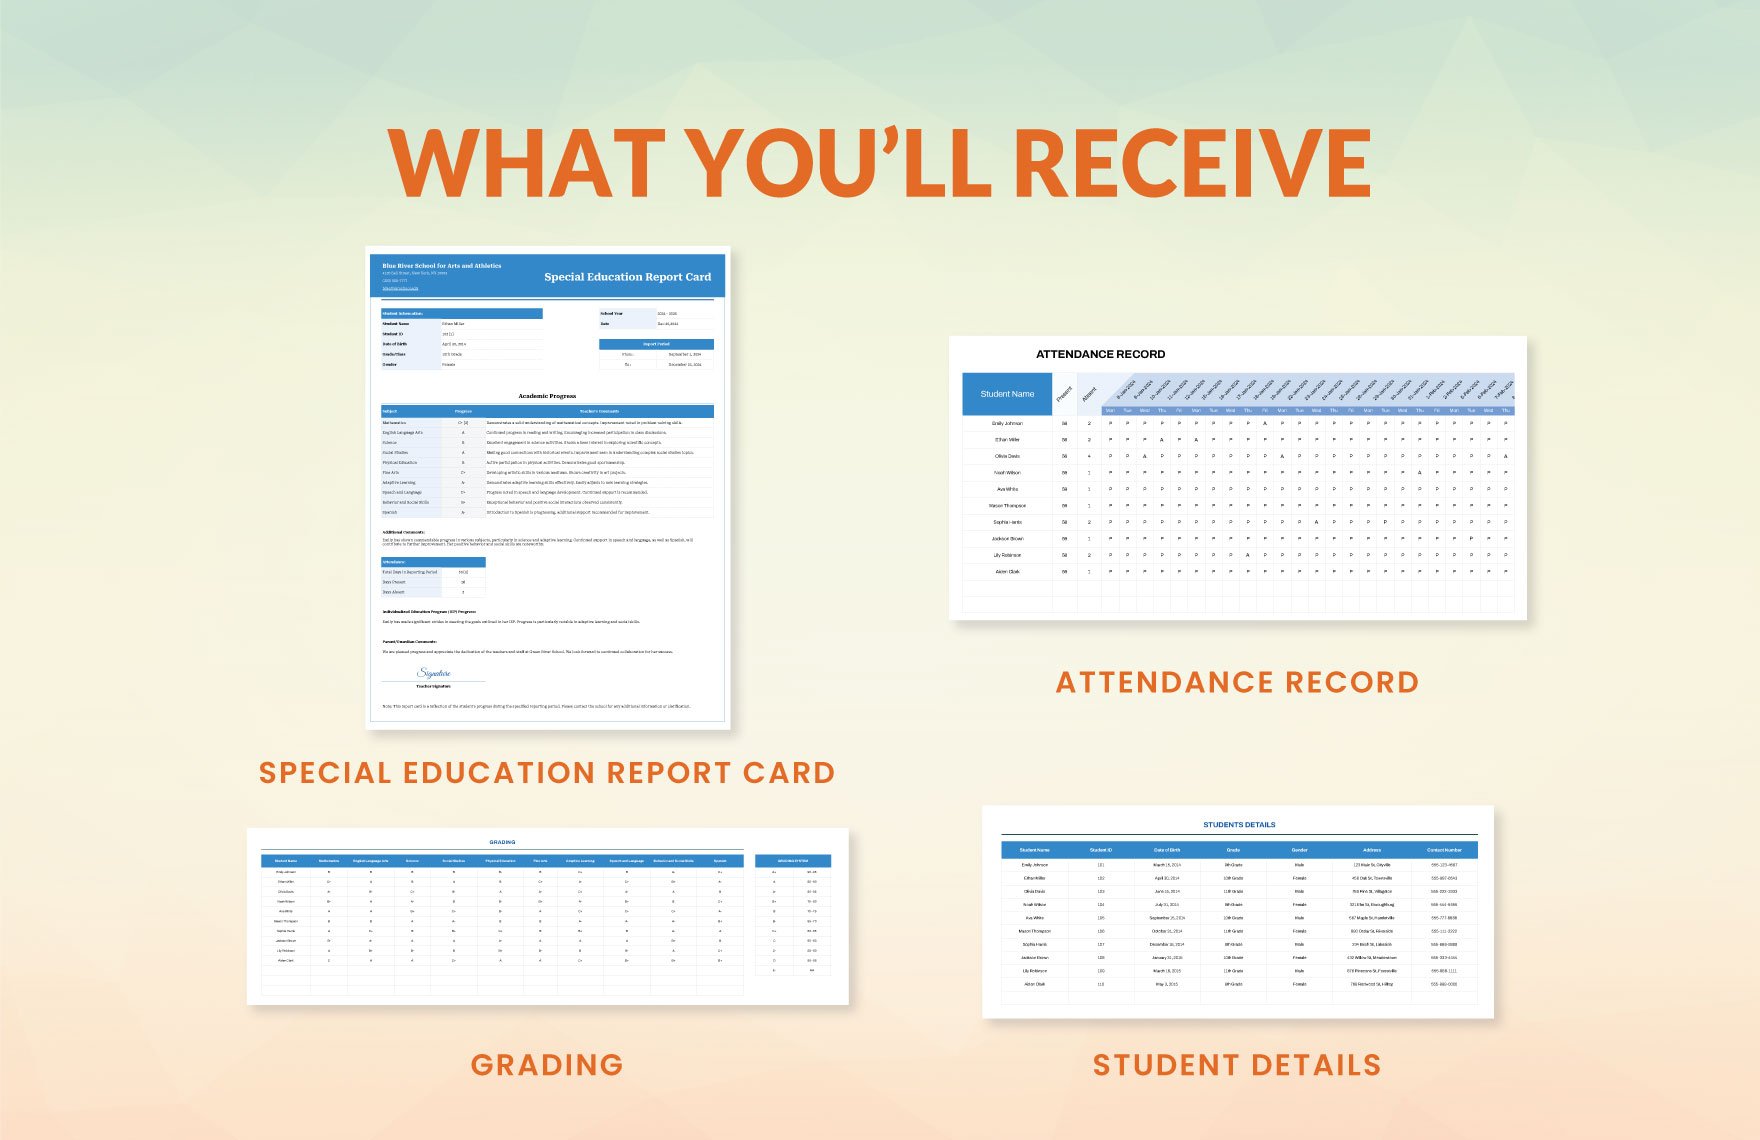 Special Education Report Card Template